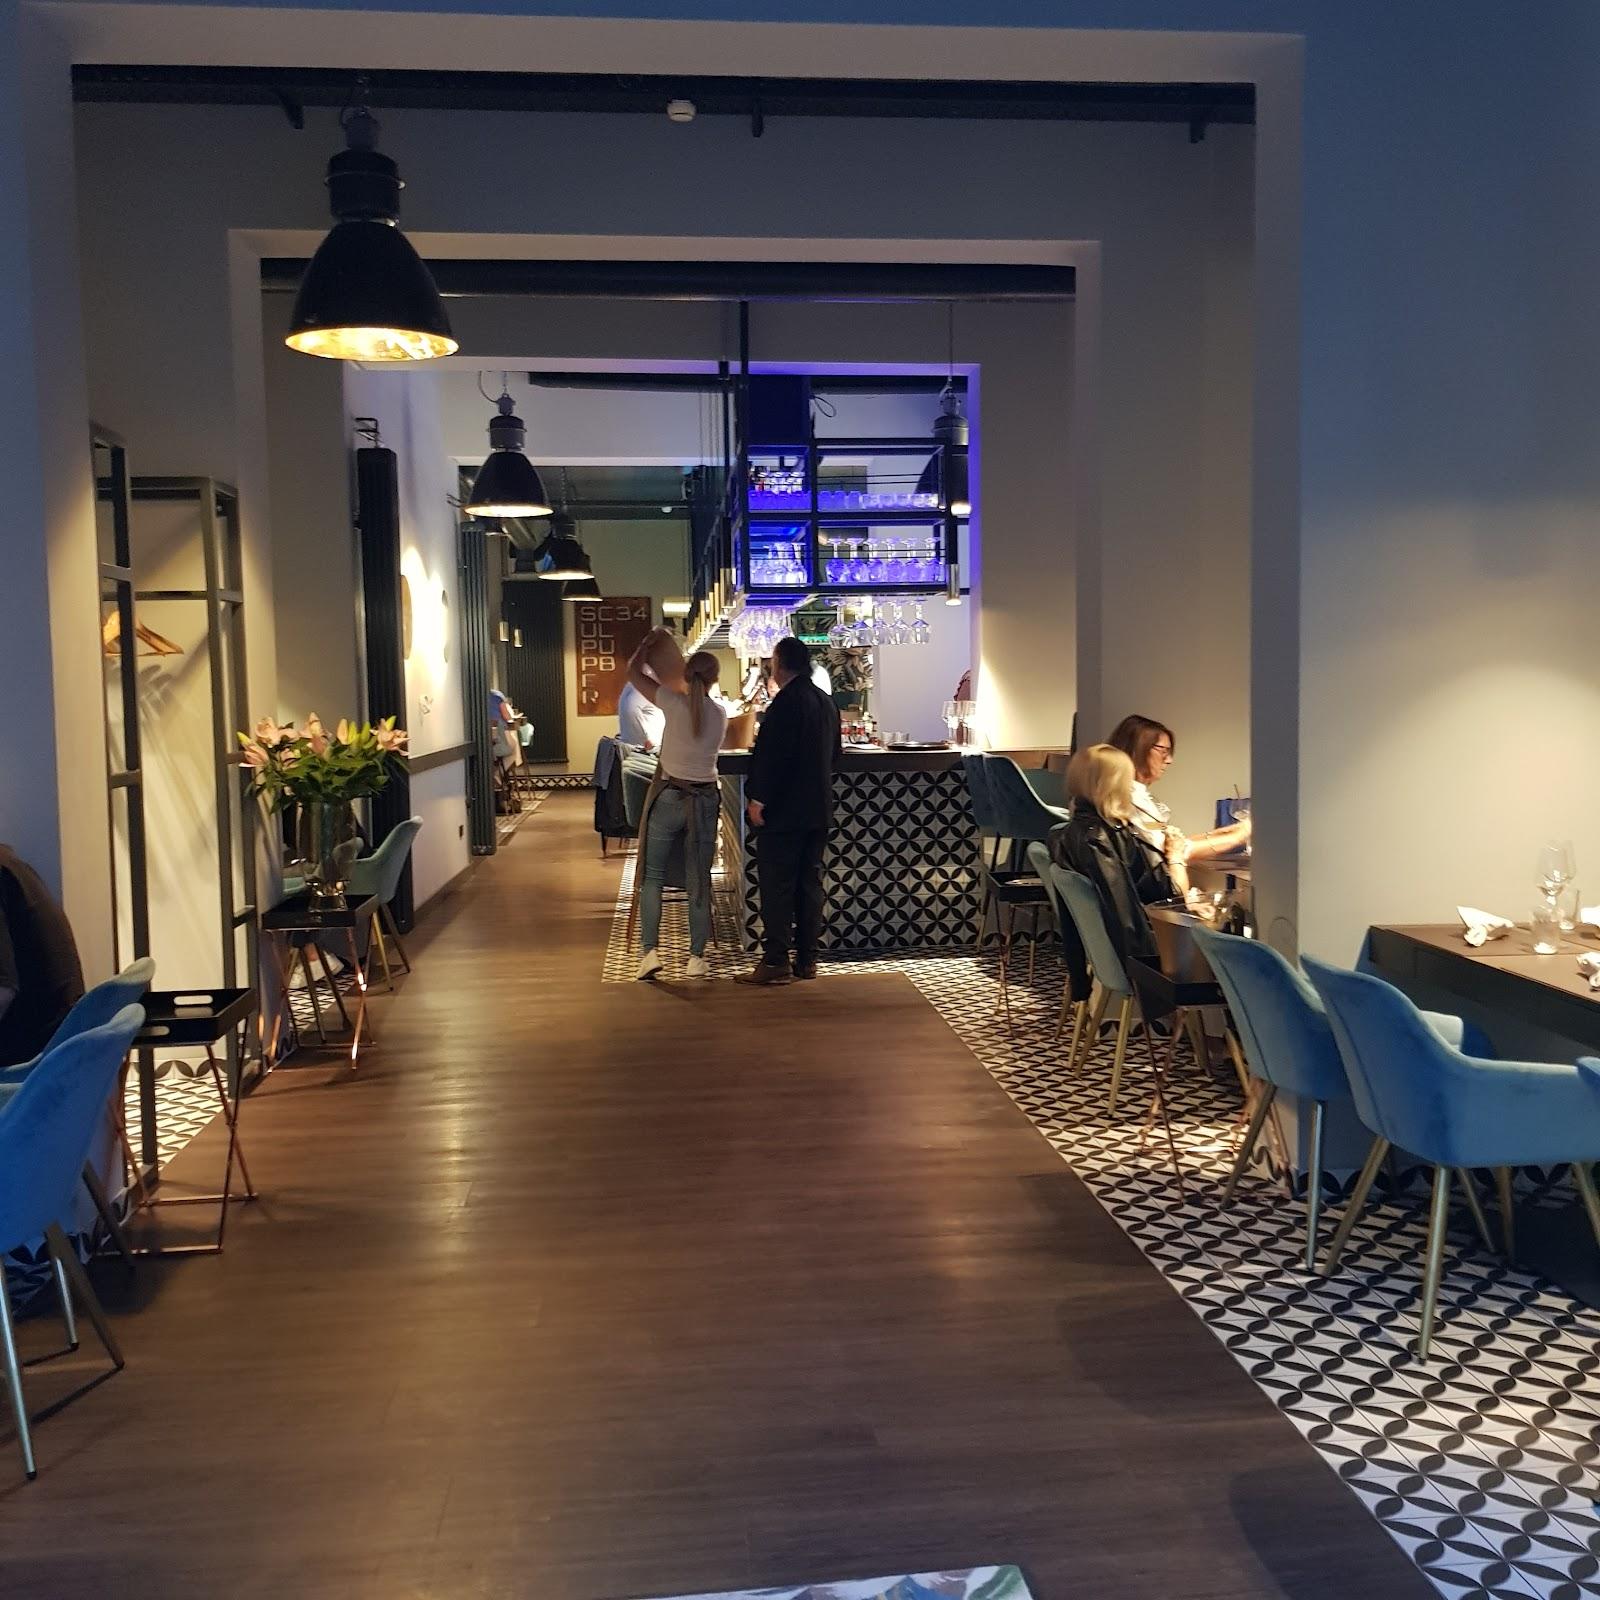 Restaurant "Supperclub34" in Hannover